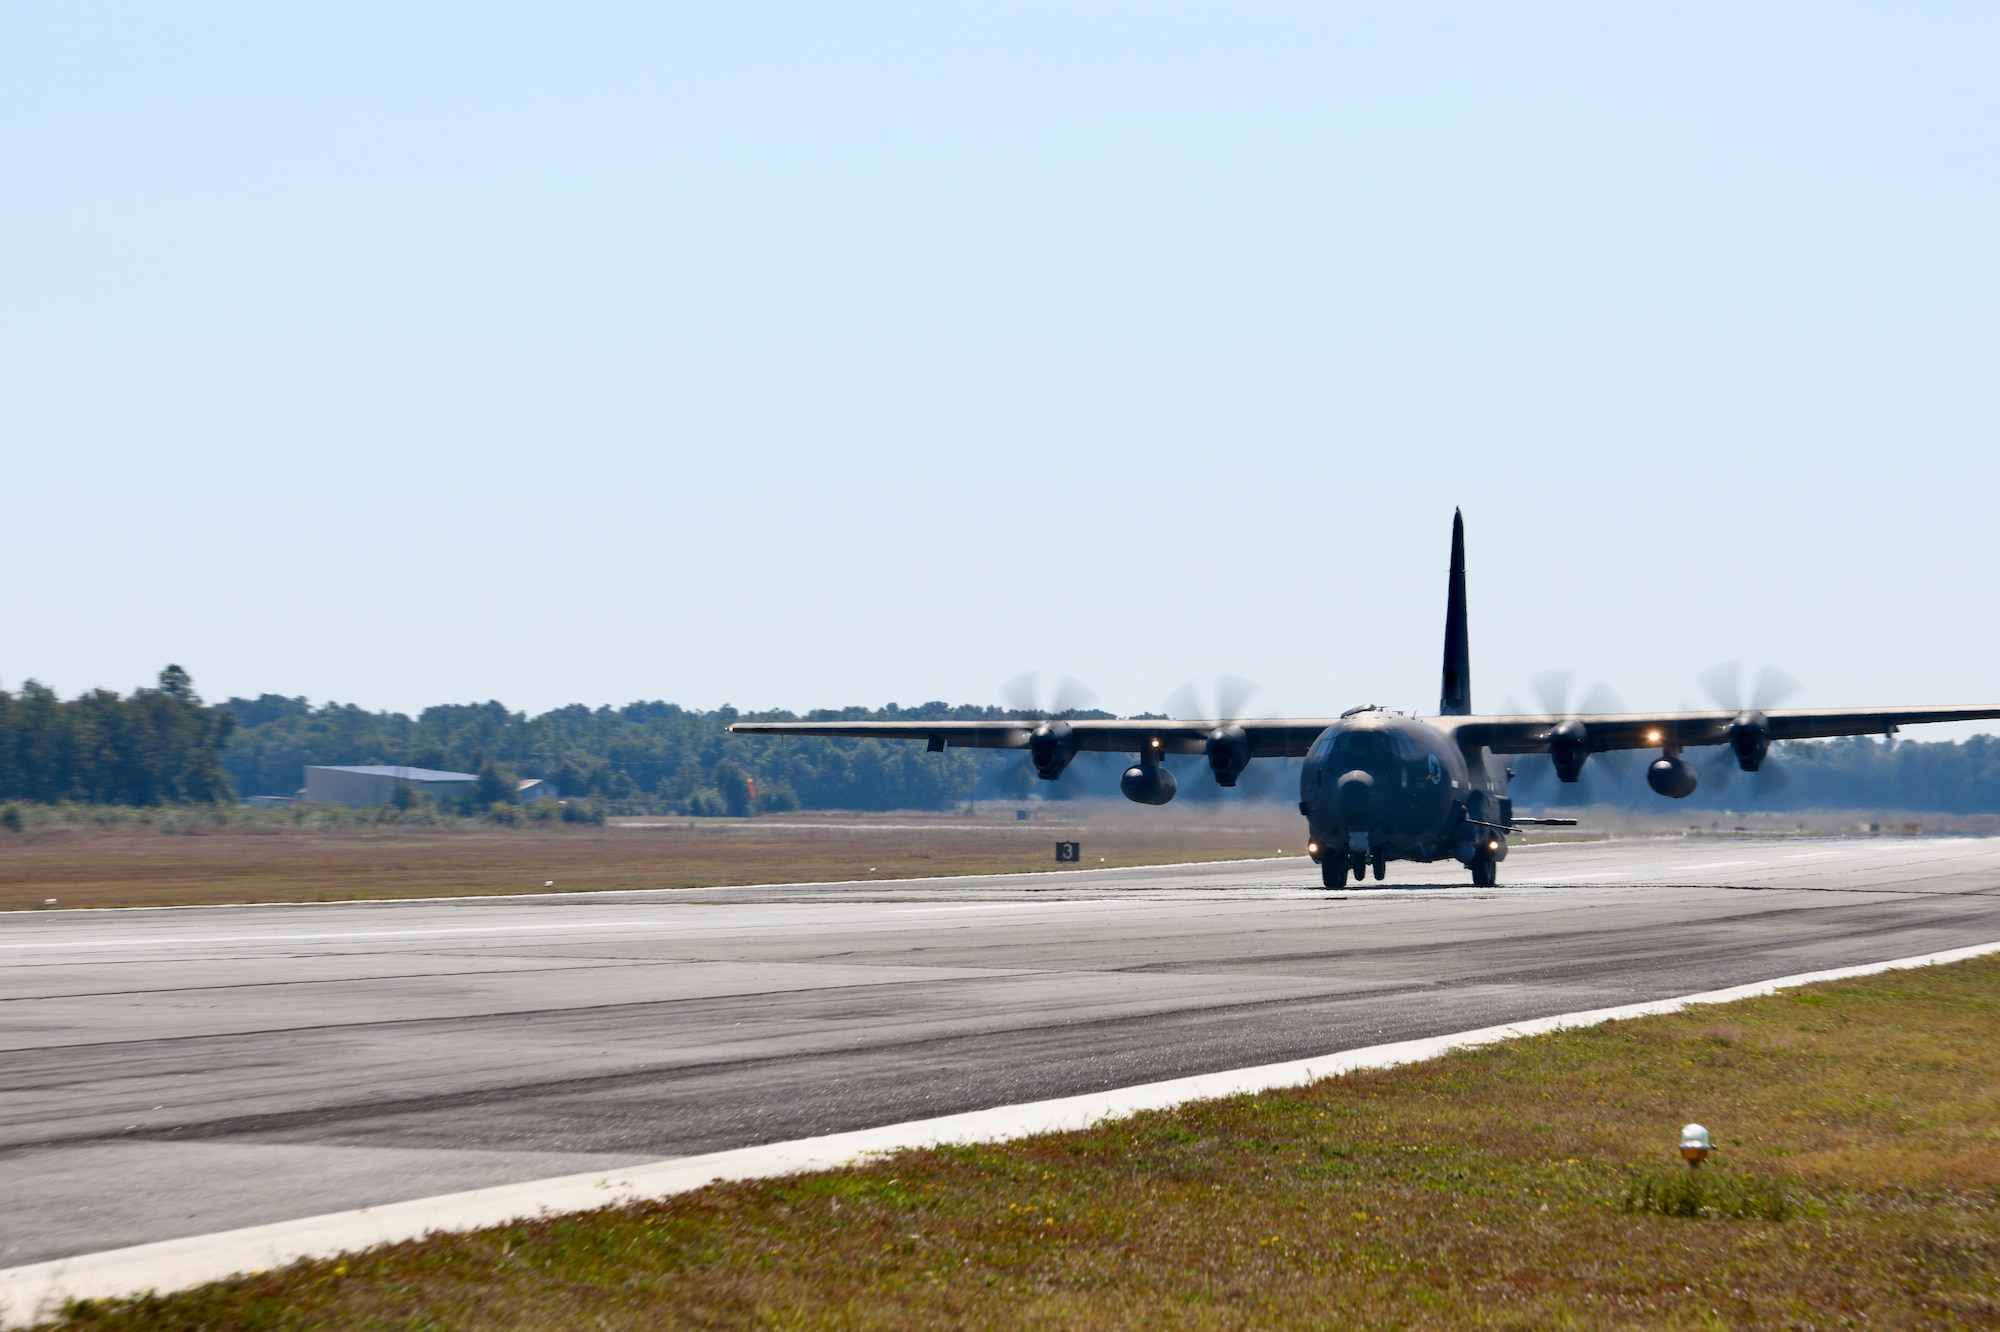 An AC-130J Ghostrider takes-off from Bob Sikes Airport following the AC-130J Ghostrider Dedication and Delivery Ceremony Nov. 2, 2022, at in Crestview, Florida. Air Force Special Operations Command received its 31st and final AC-130J Ghostrider, completing the command’s transition from the legacy AC-130W, AC-130U and AC-130H fleets.